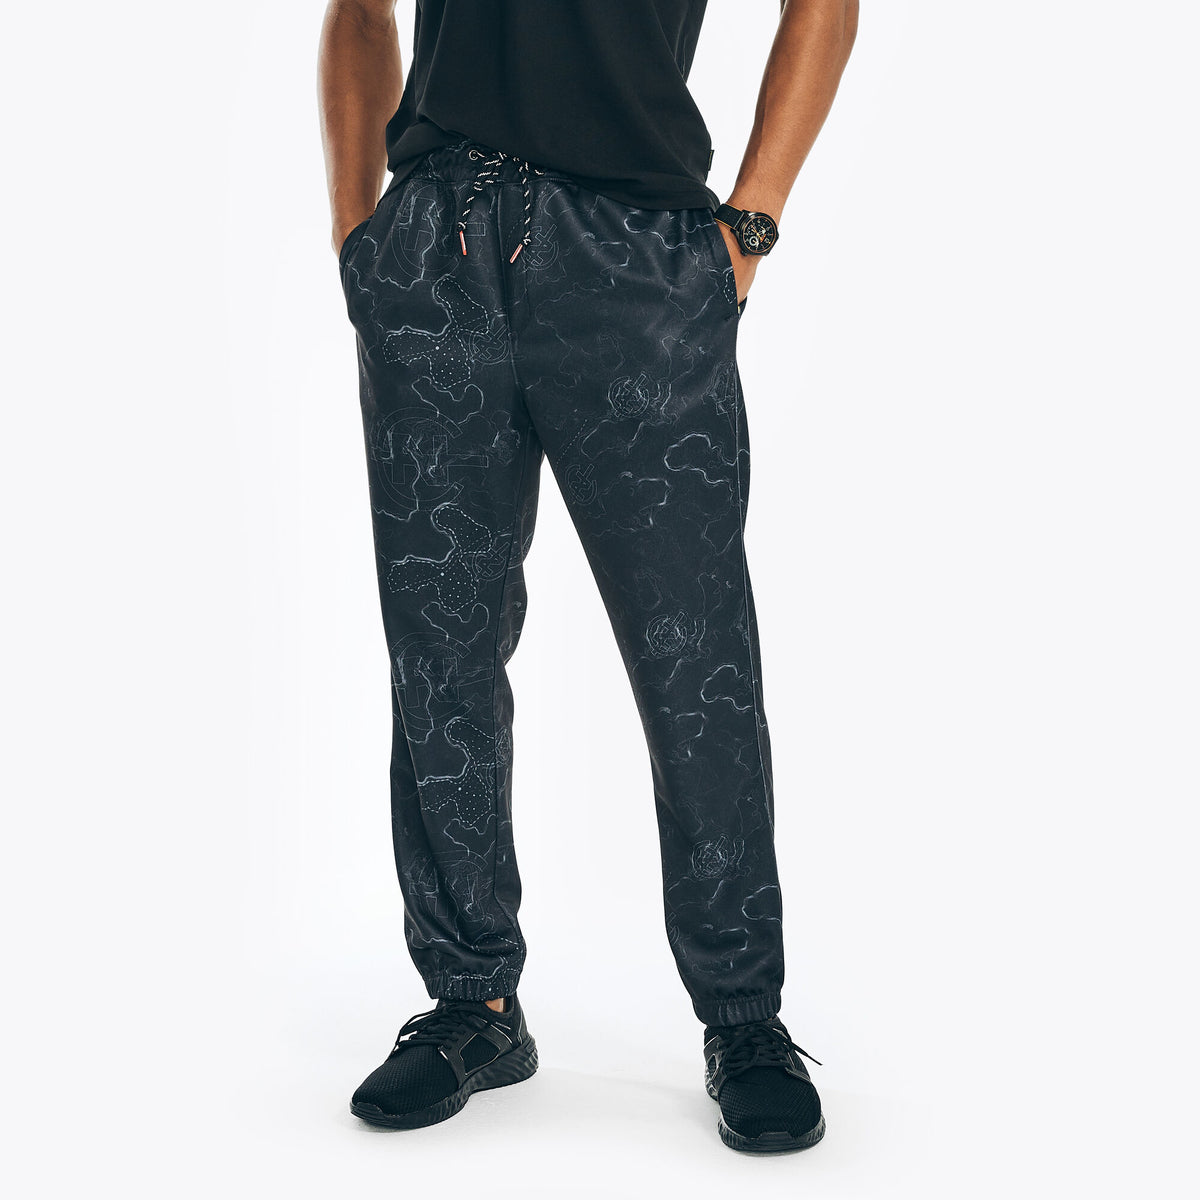 Nautica Men's Competition Sustainably Crafted Printed Jogger True Black